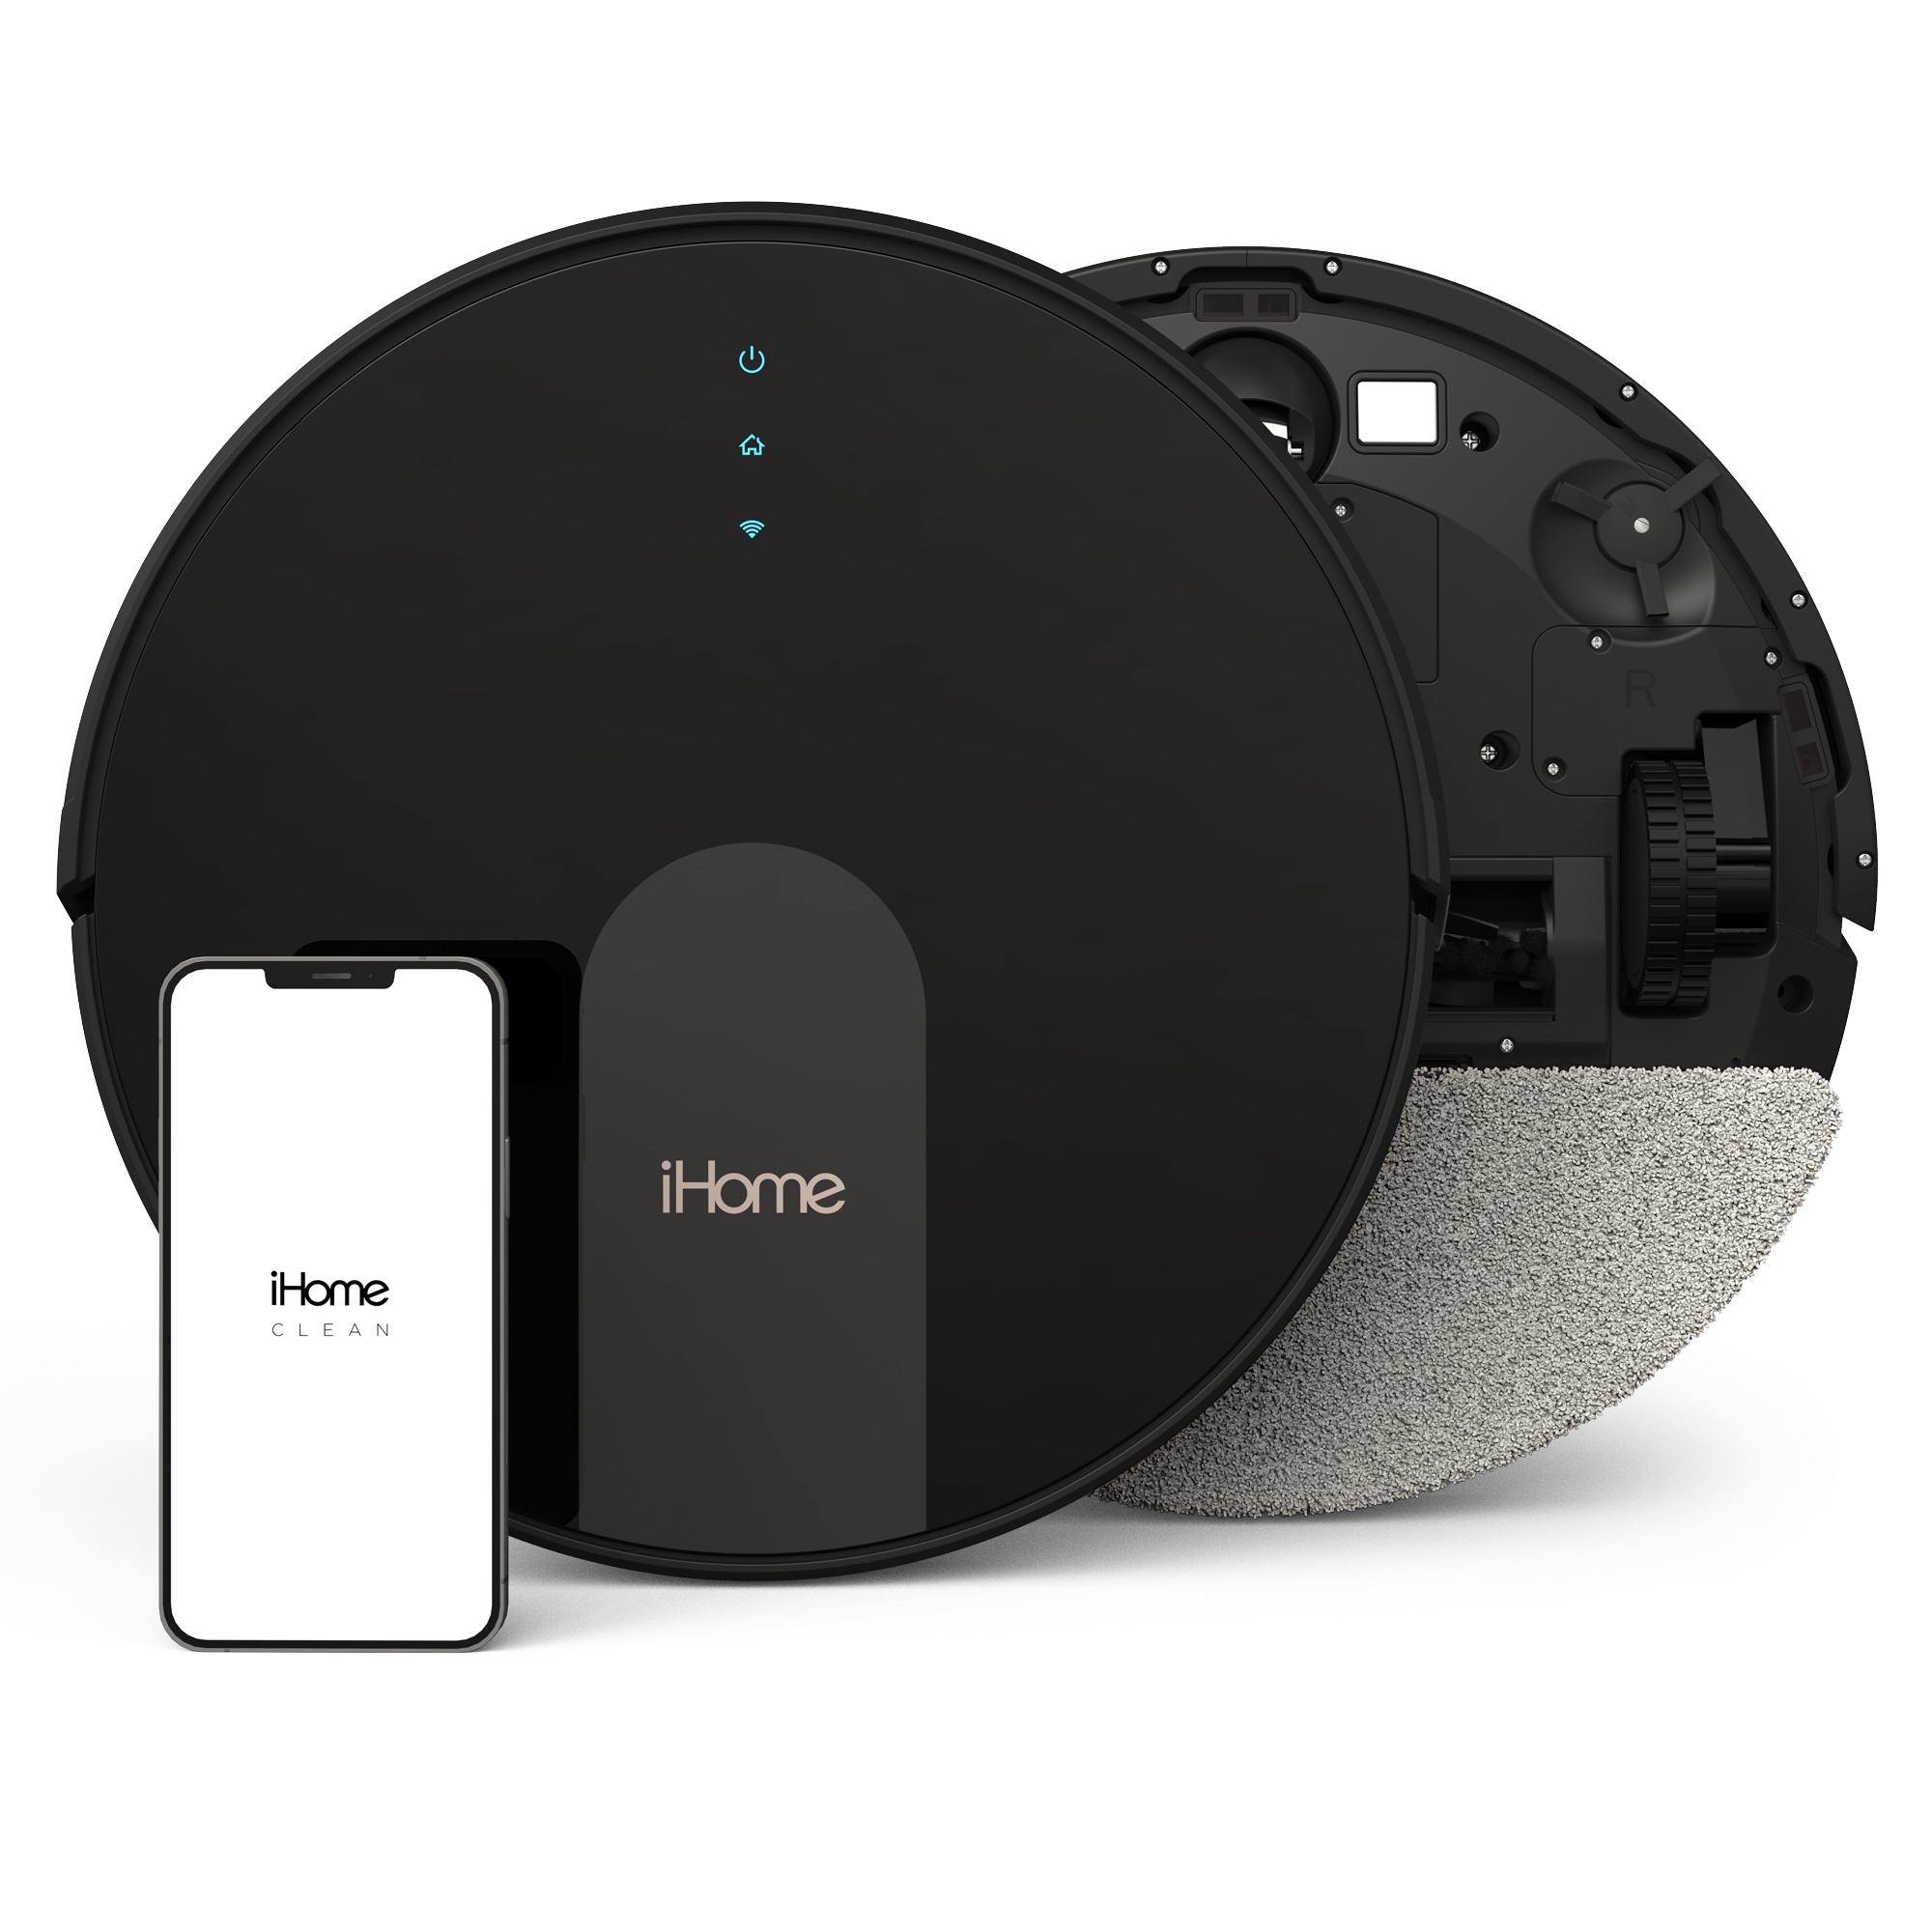 iHome AutoVac Eclipse G 2-in-1 Robot Vacuum and Mop with Homemap Navigation, Ultra Strong Suction Power, Wi-Fi/App Connectivity - image 1 of 11